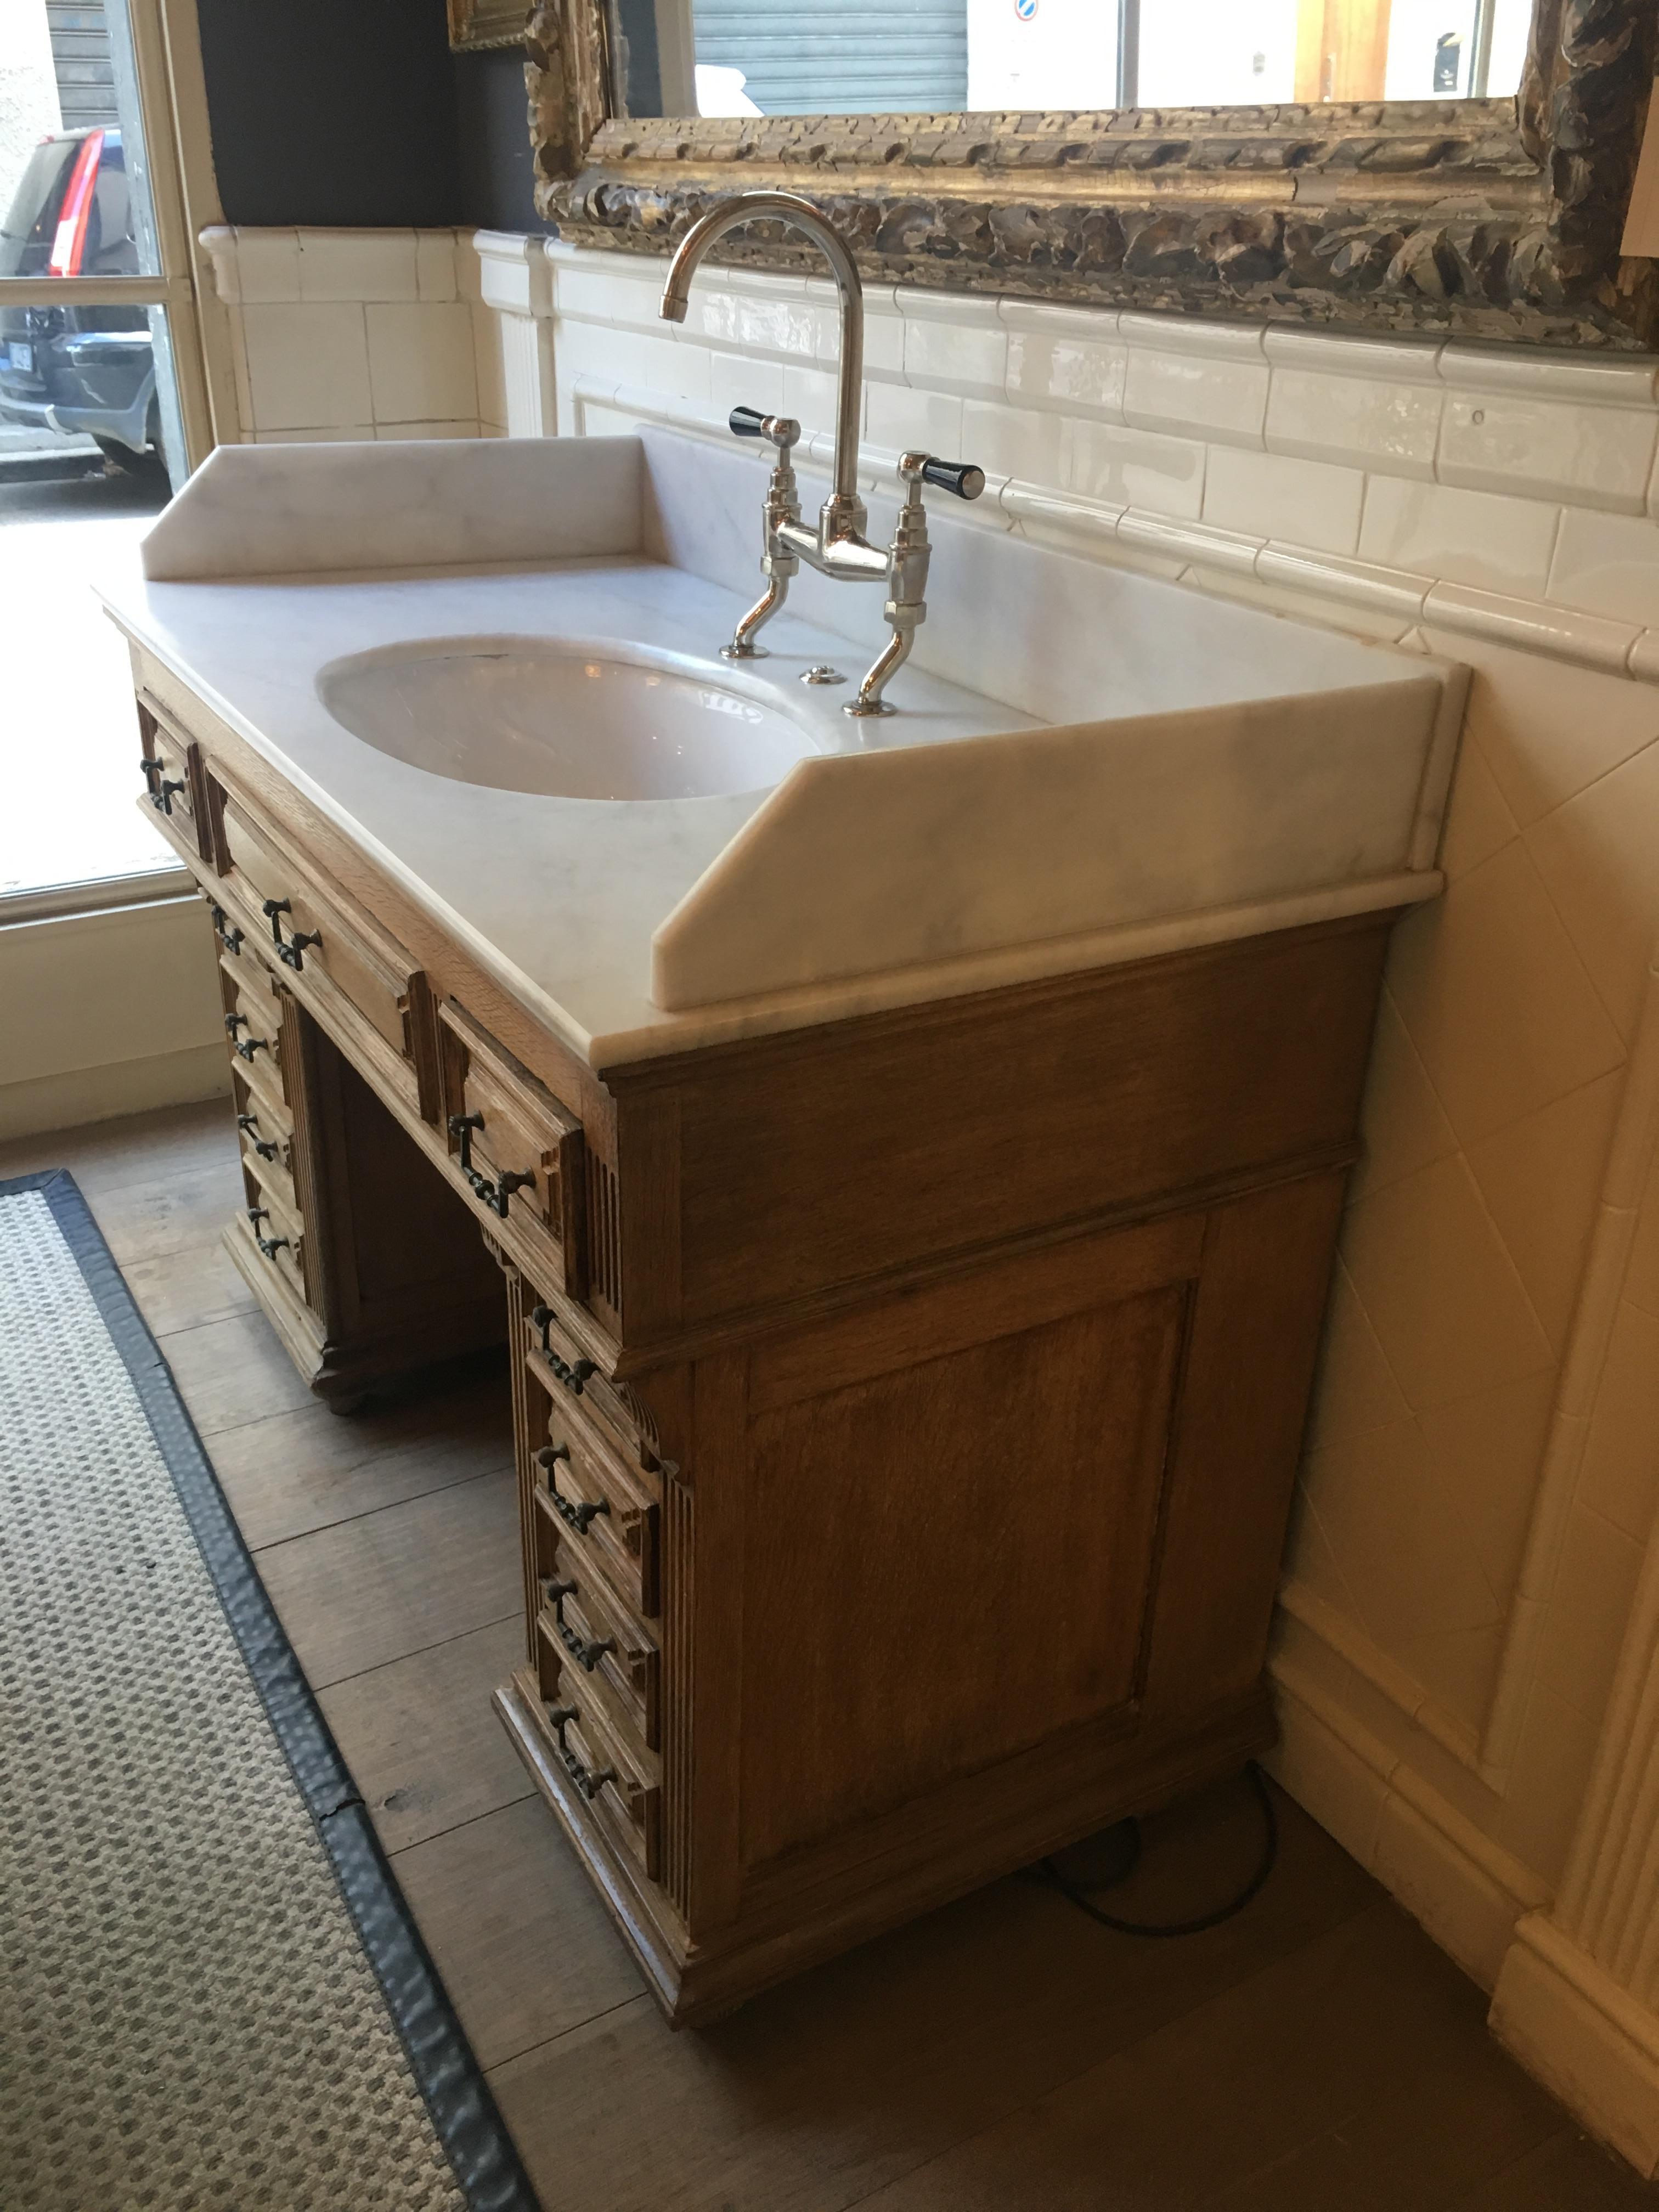 19th Century French Oak Cupboard Sink with Drawers and Carrara Marble Top, 1890s (Viktorianisch)